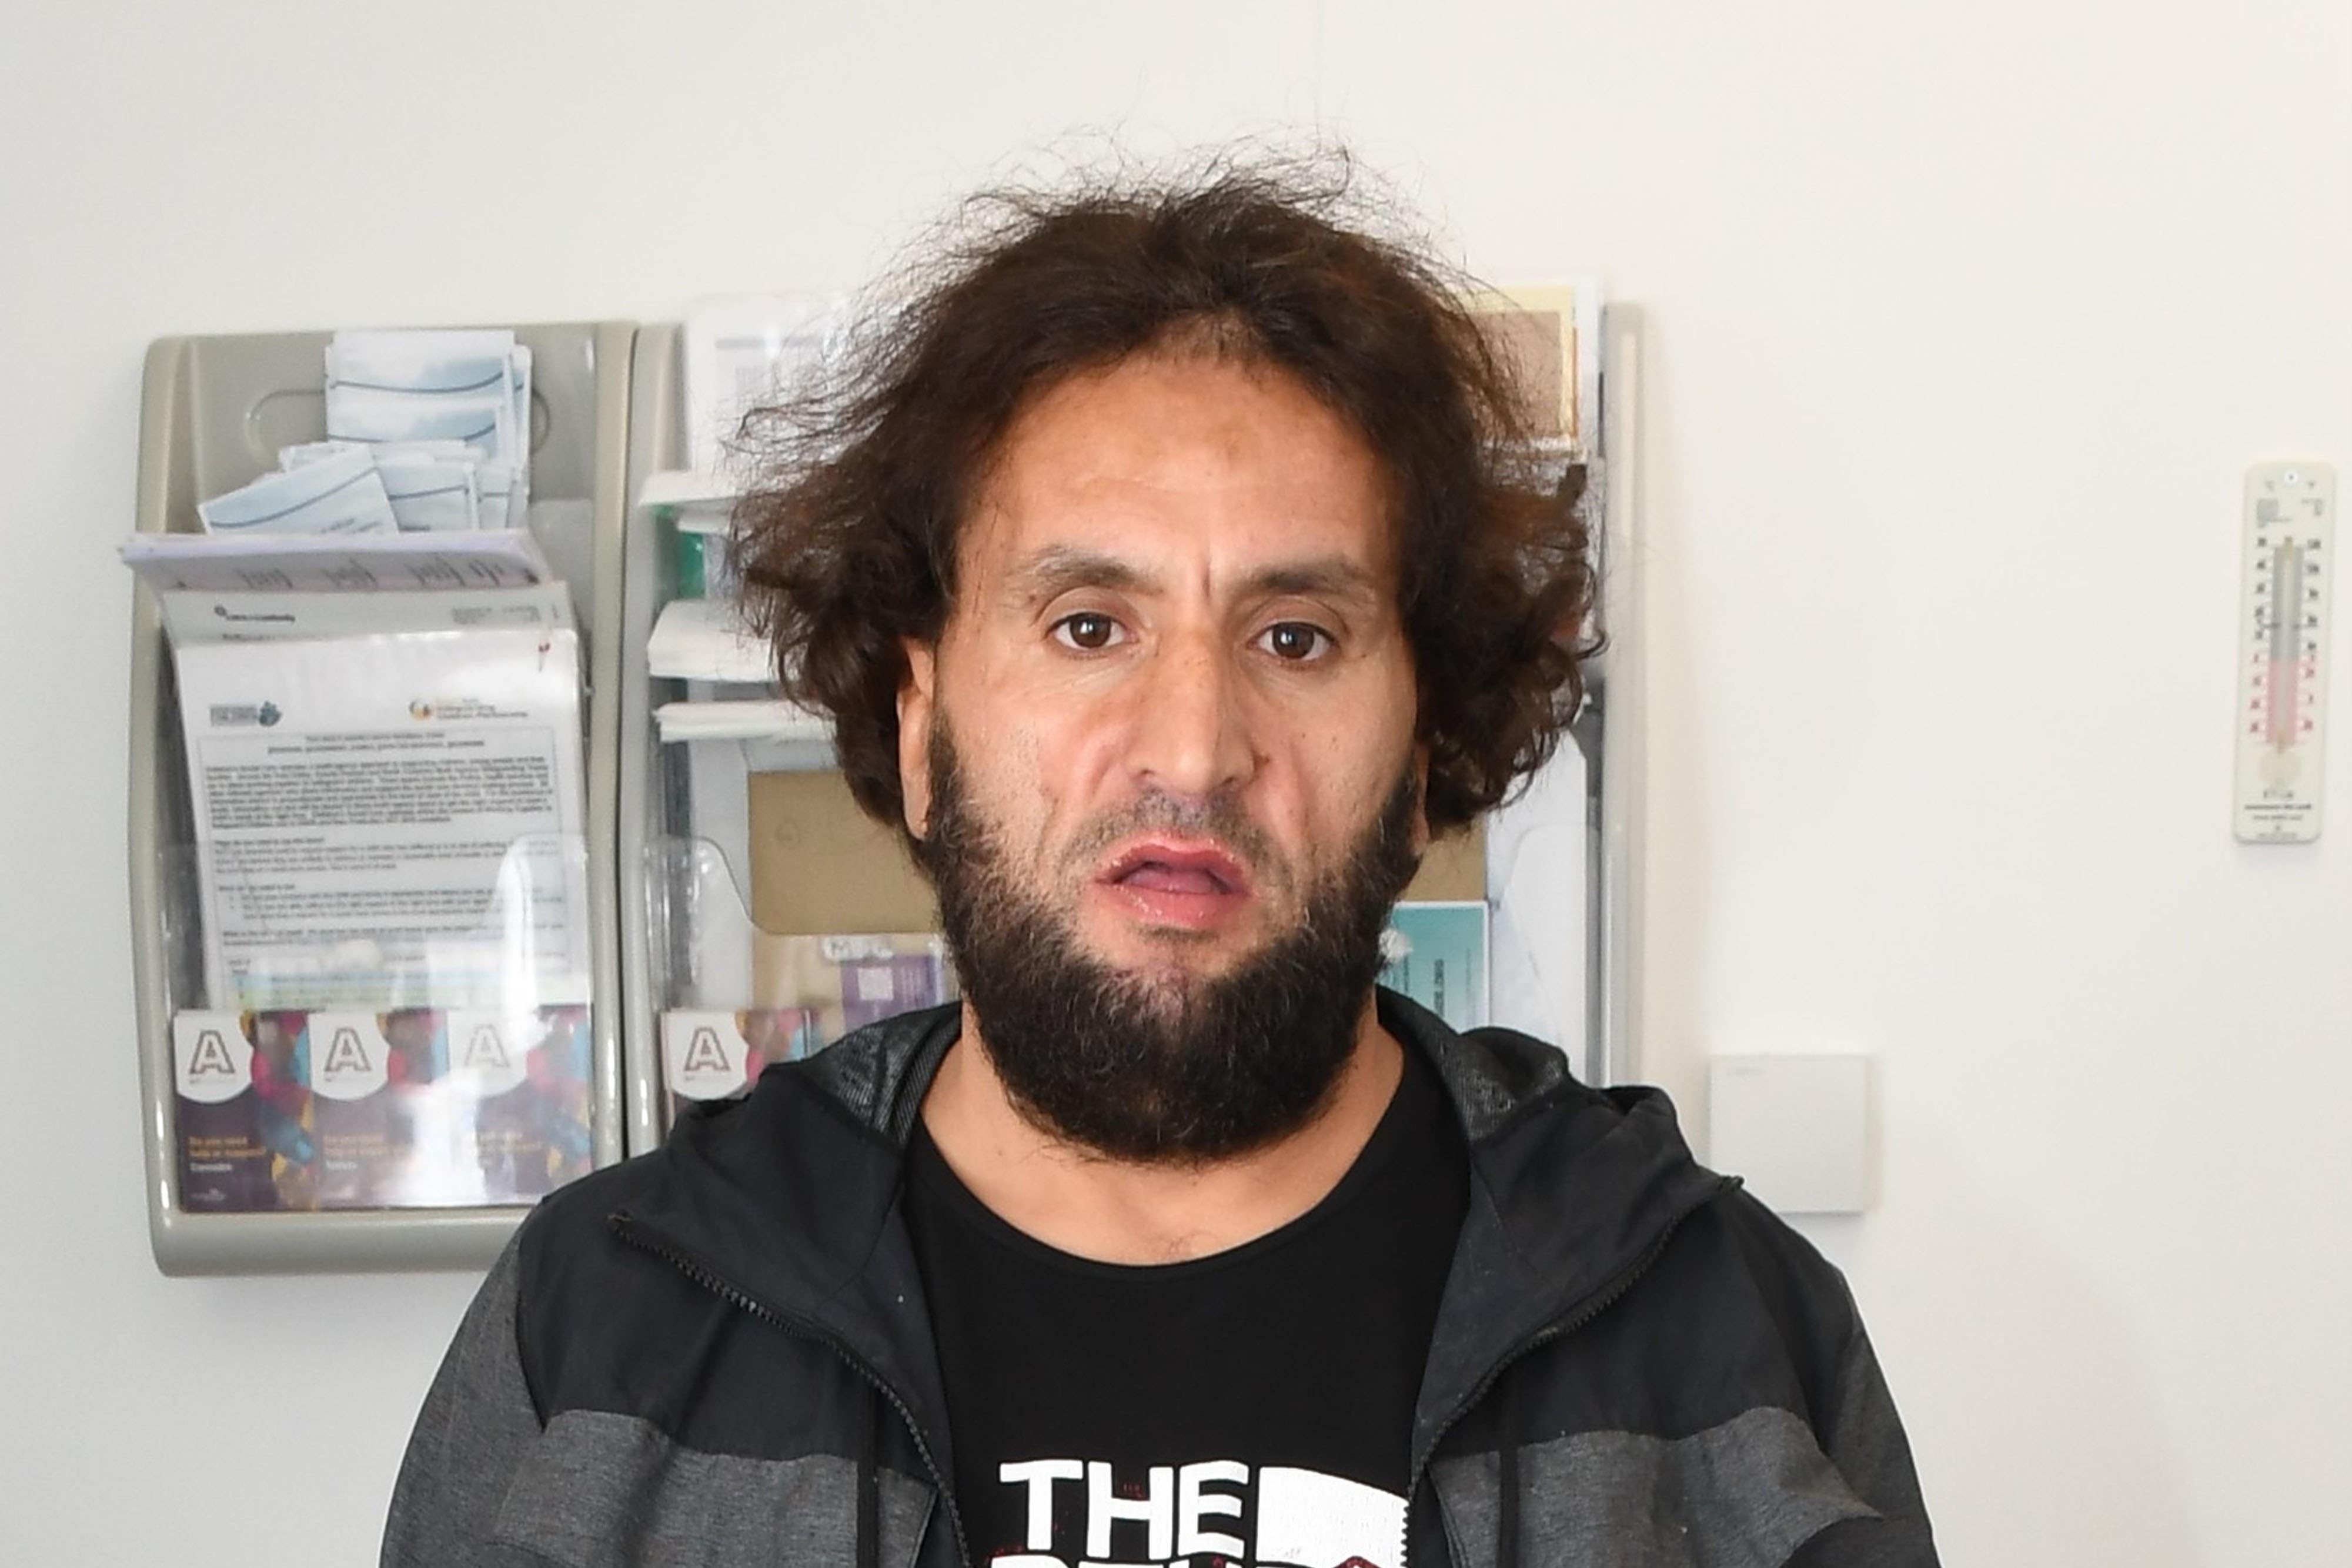 Ahmed Alid was sentenced at Teesside Crown Court for the murder of Terence Carney